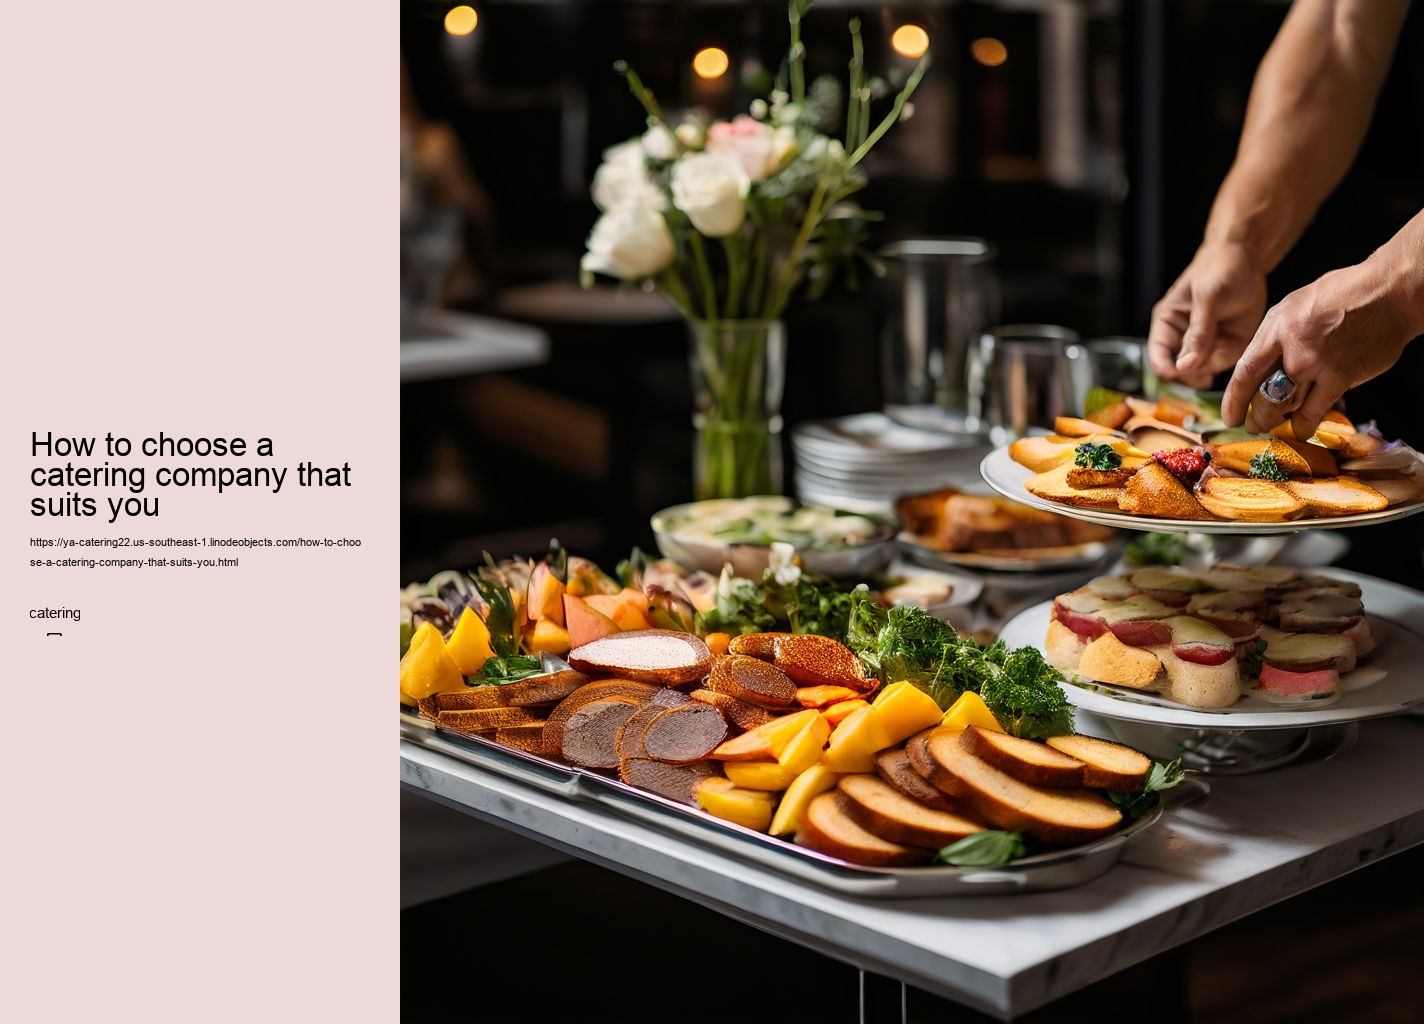 How to choose a catering company that suits you